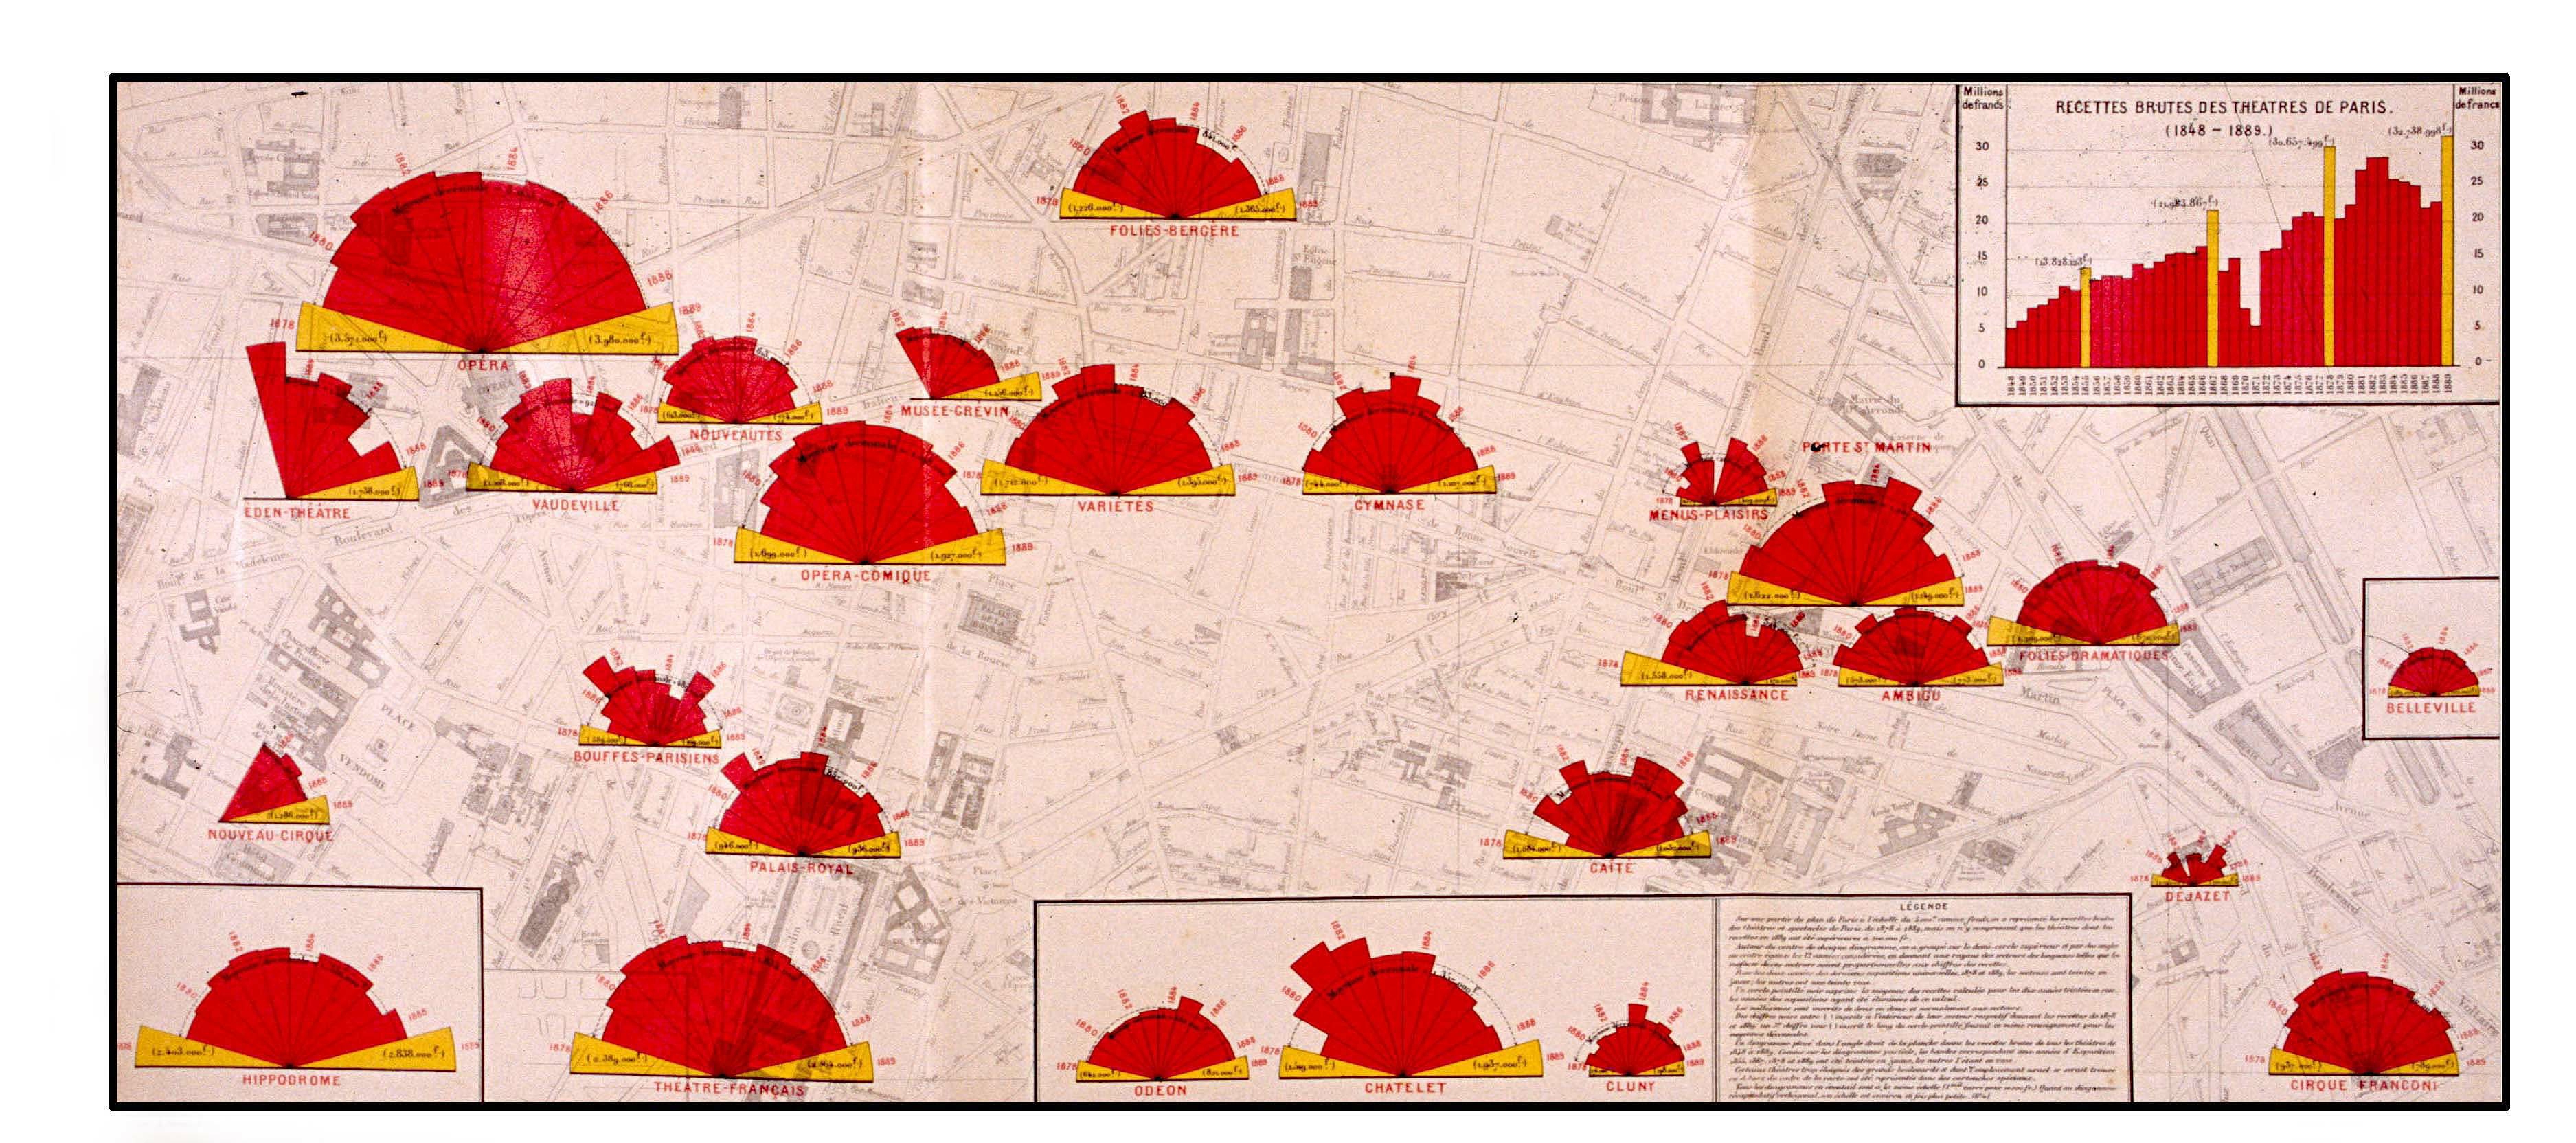 Polar / area diagrams on a map: “Gross receipts of theaters in Paris from 1878 to 1889” (Exposition Universelle de 1889: Recettes brutes des théatres et spectacles de Paris 1878 à 1889). Each diagram uses sectors of length proportional to the receipts at a given theater in each year from 1878 to 1889, highlighting the values for the years of the Universal Expositions in a lighter shade.